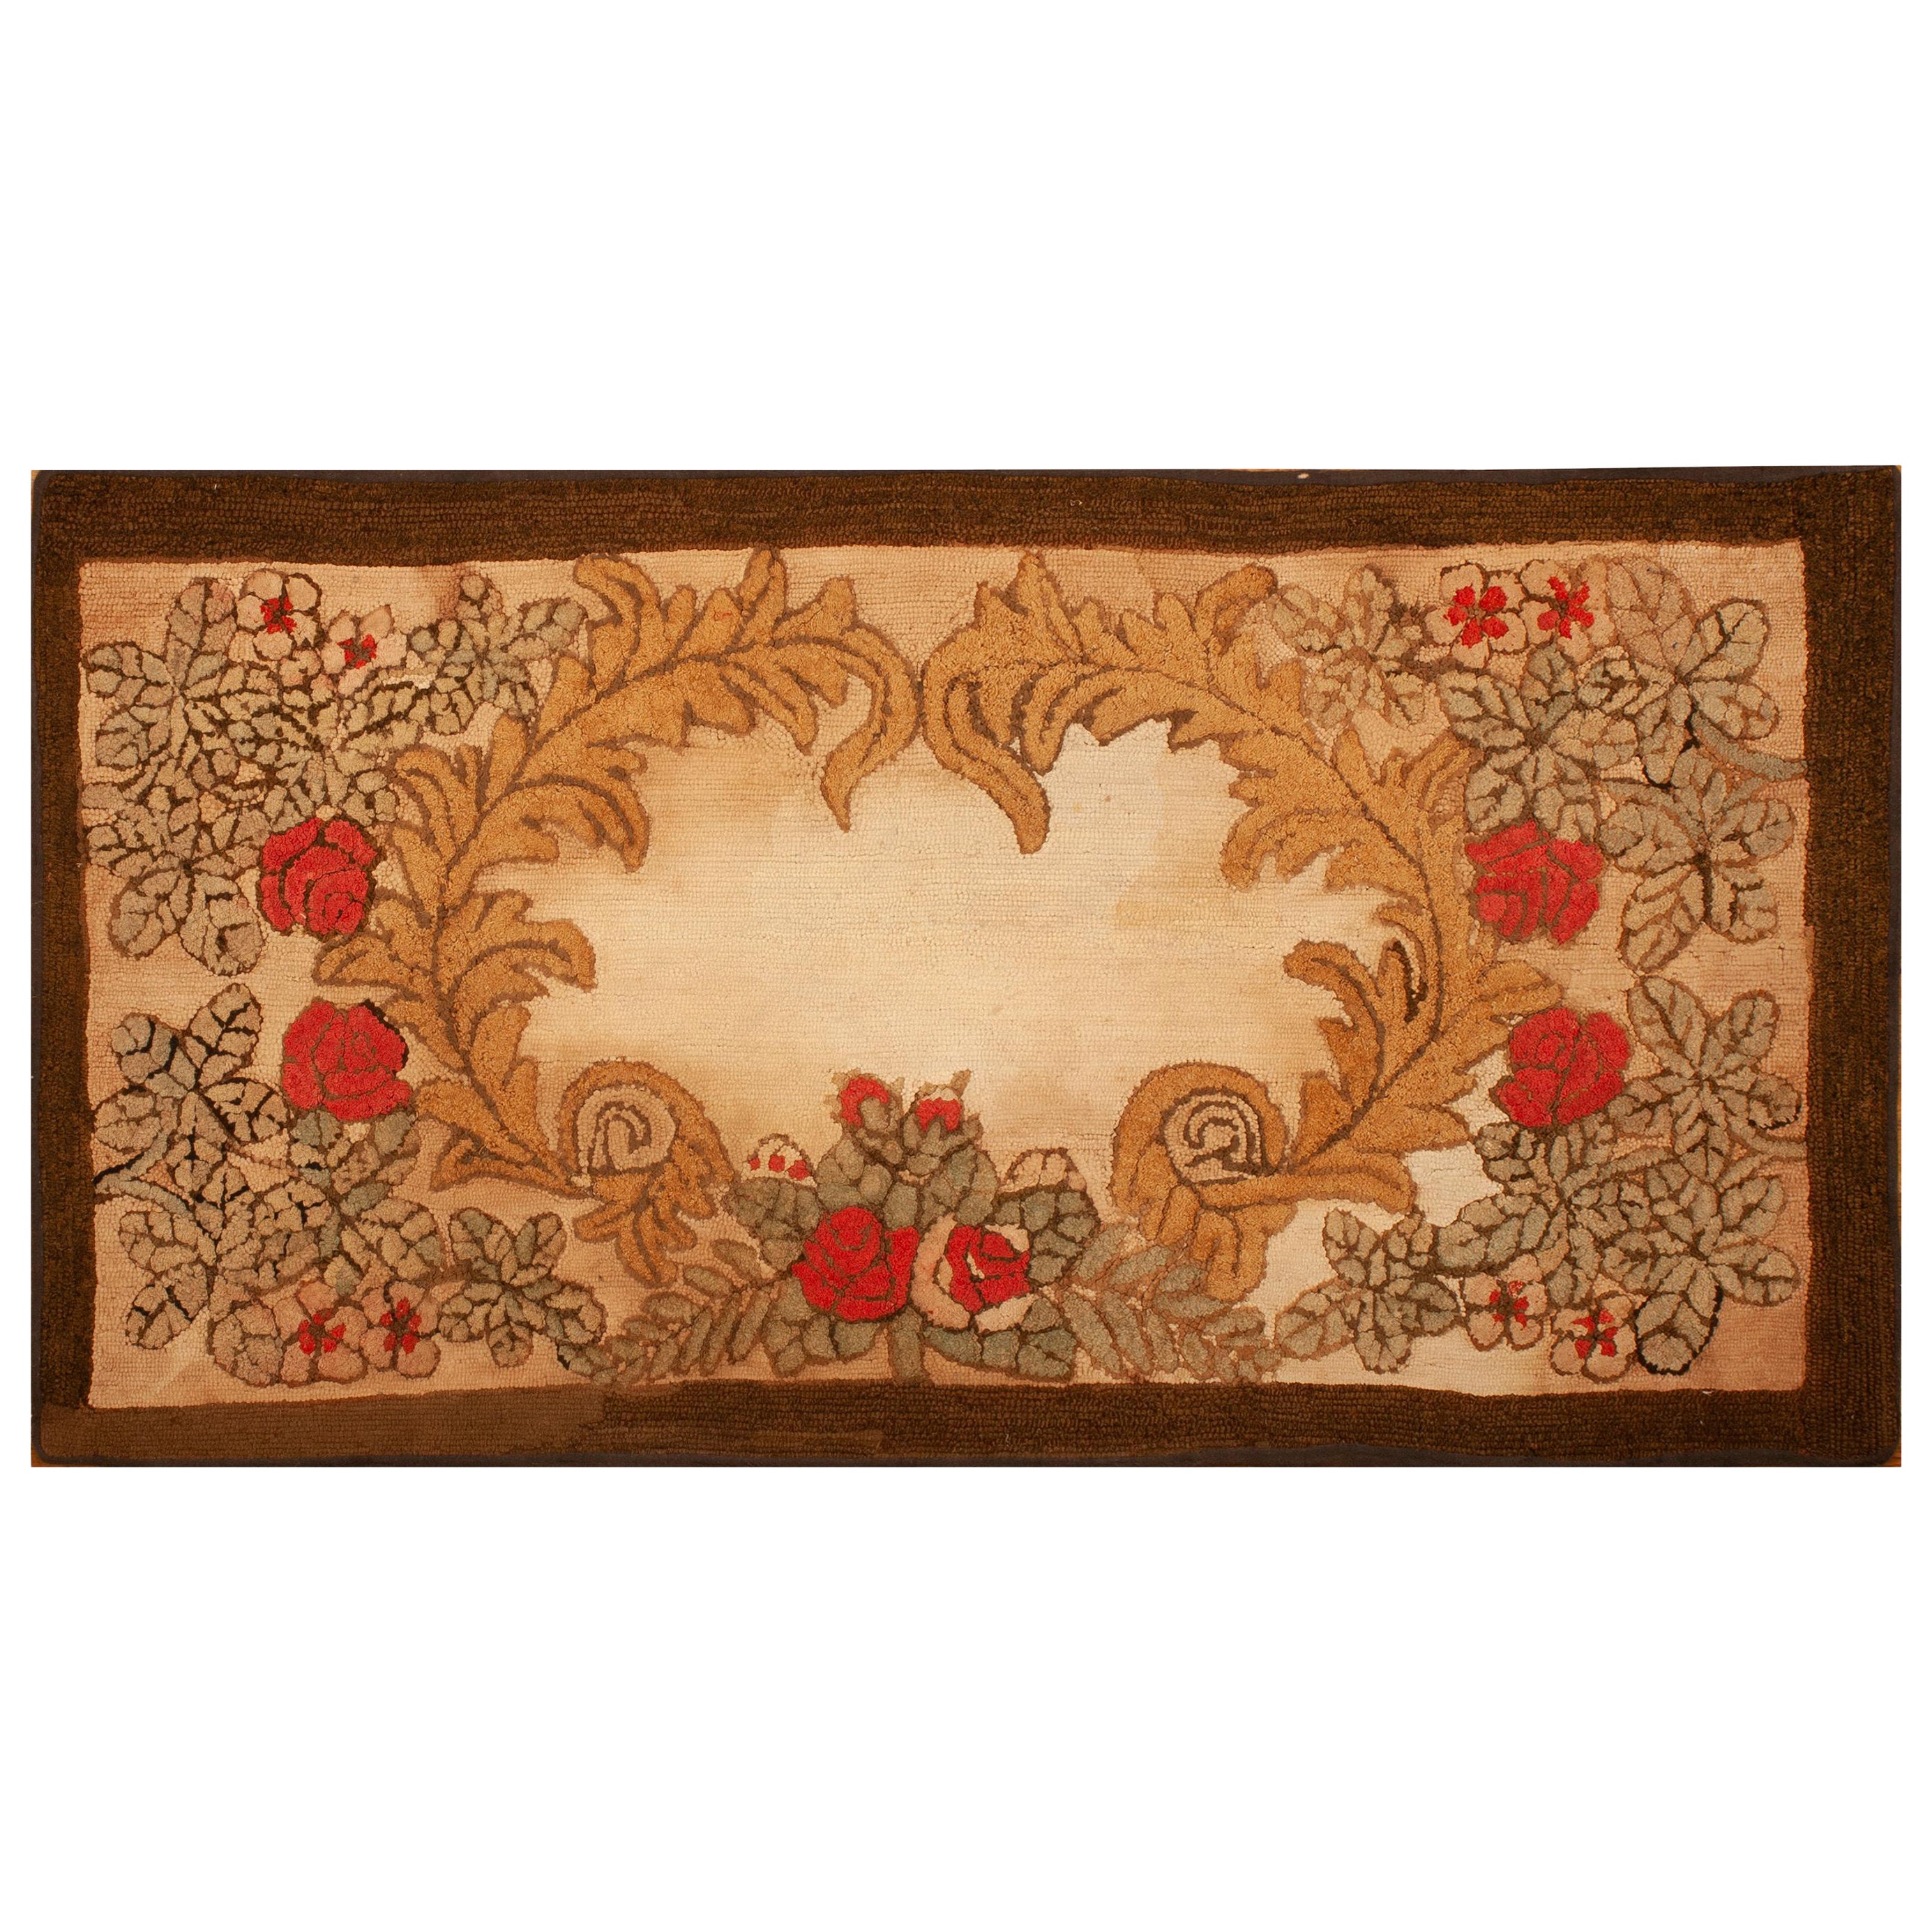 Late 19th Century American Hooked Rug ( 2'8" x 4'11" - 82 x 150 )  For Sale